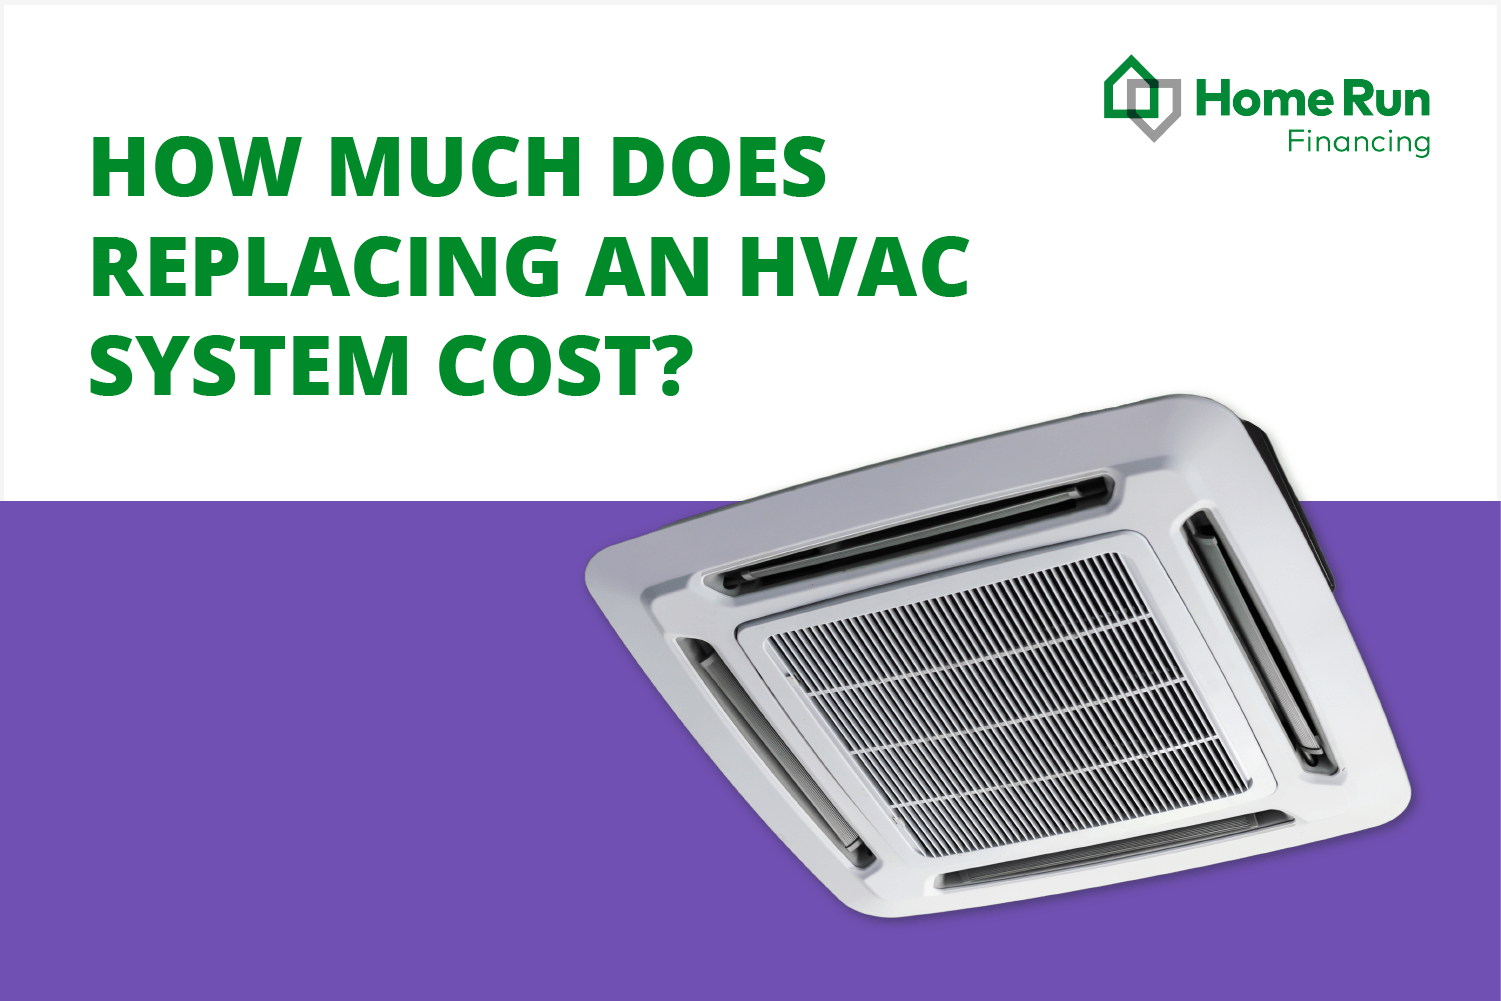 How much does replacing an HVAC system cost?